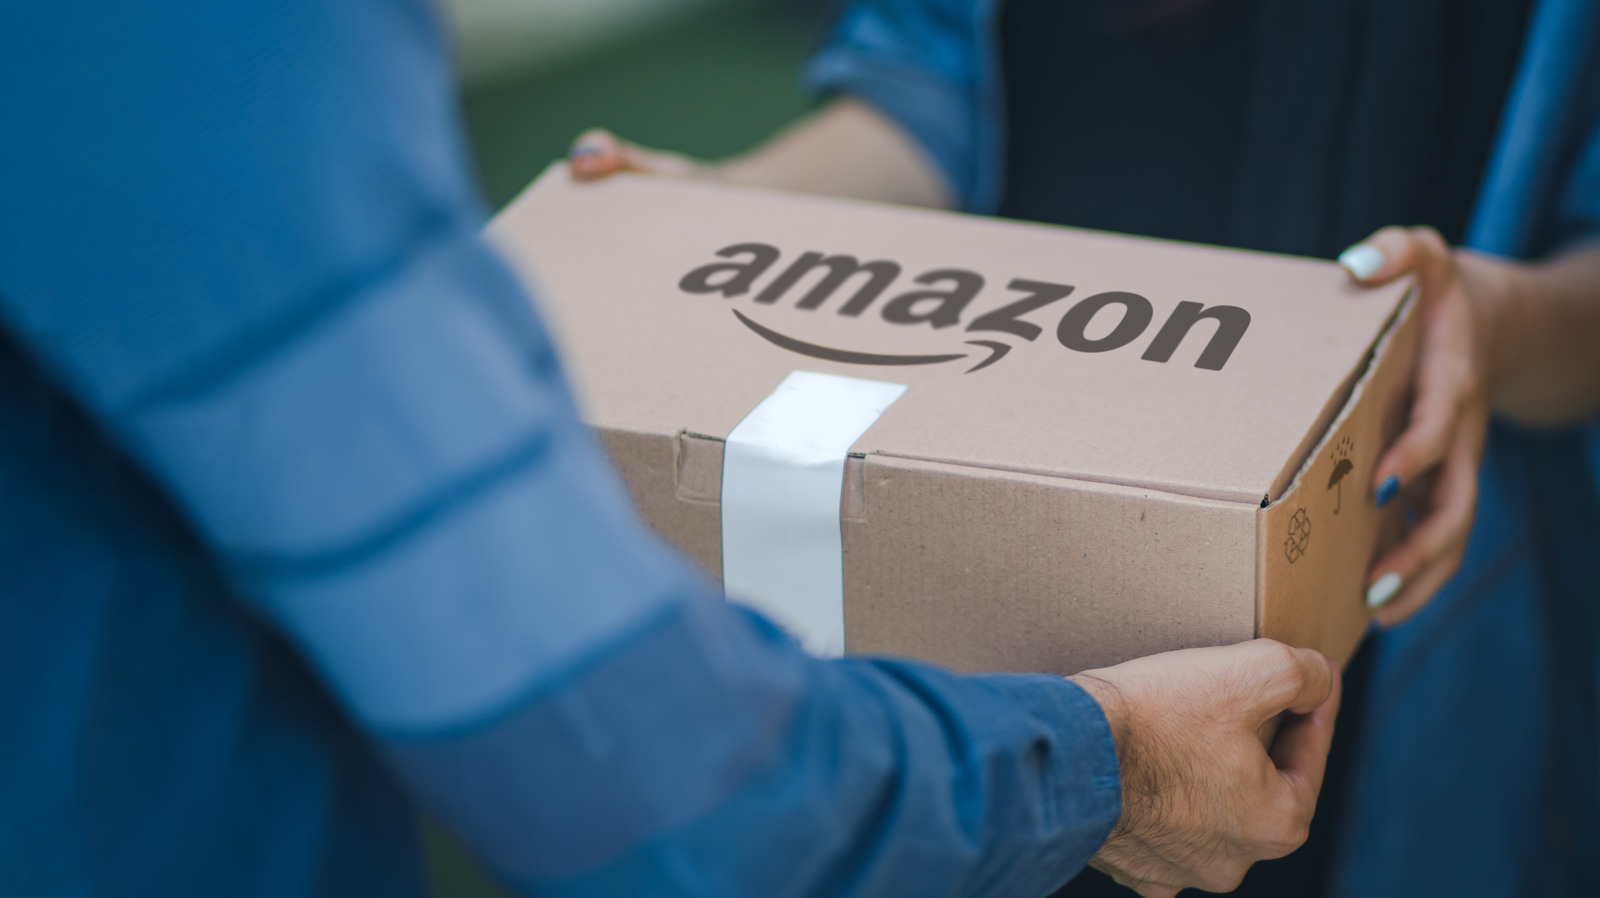 SlashGear Asks: What Amazon Tech Product Would You Never Buy? – Exclusive Survey